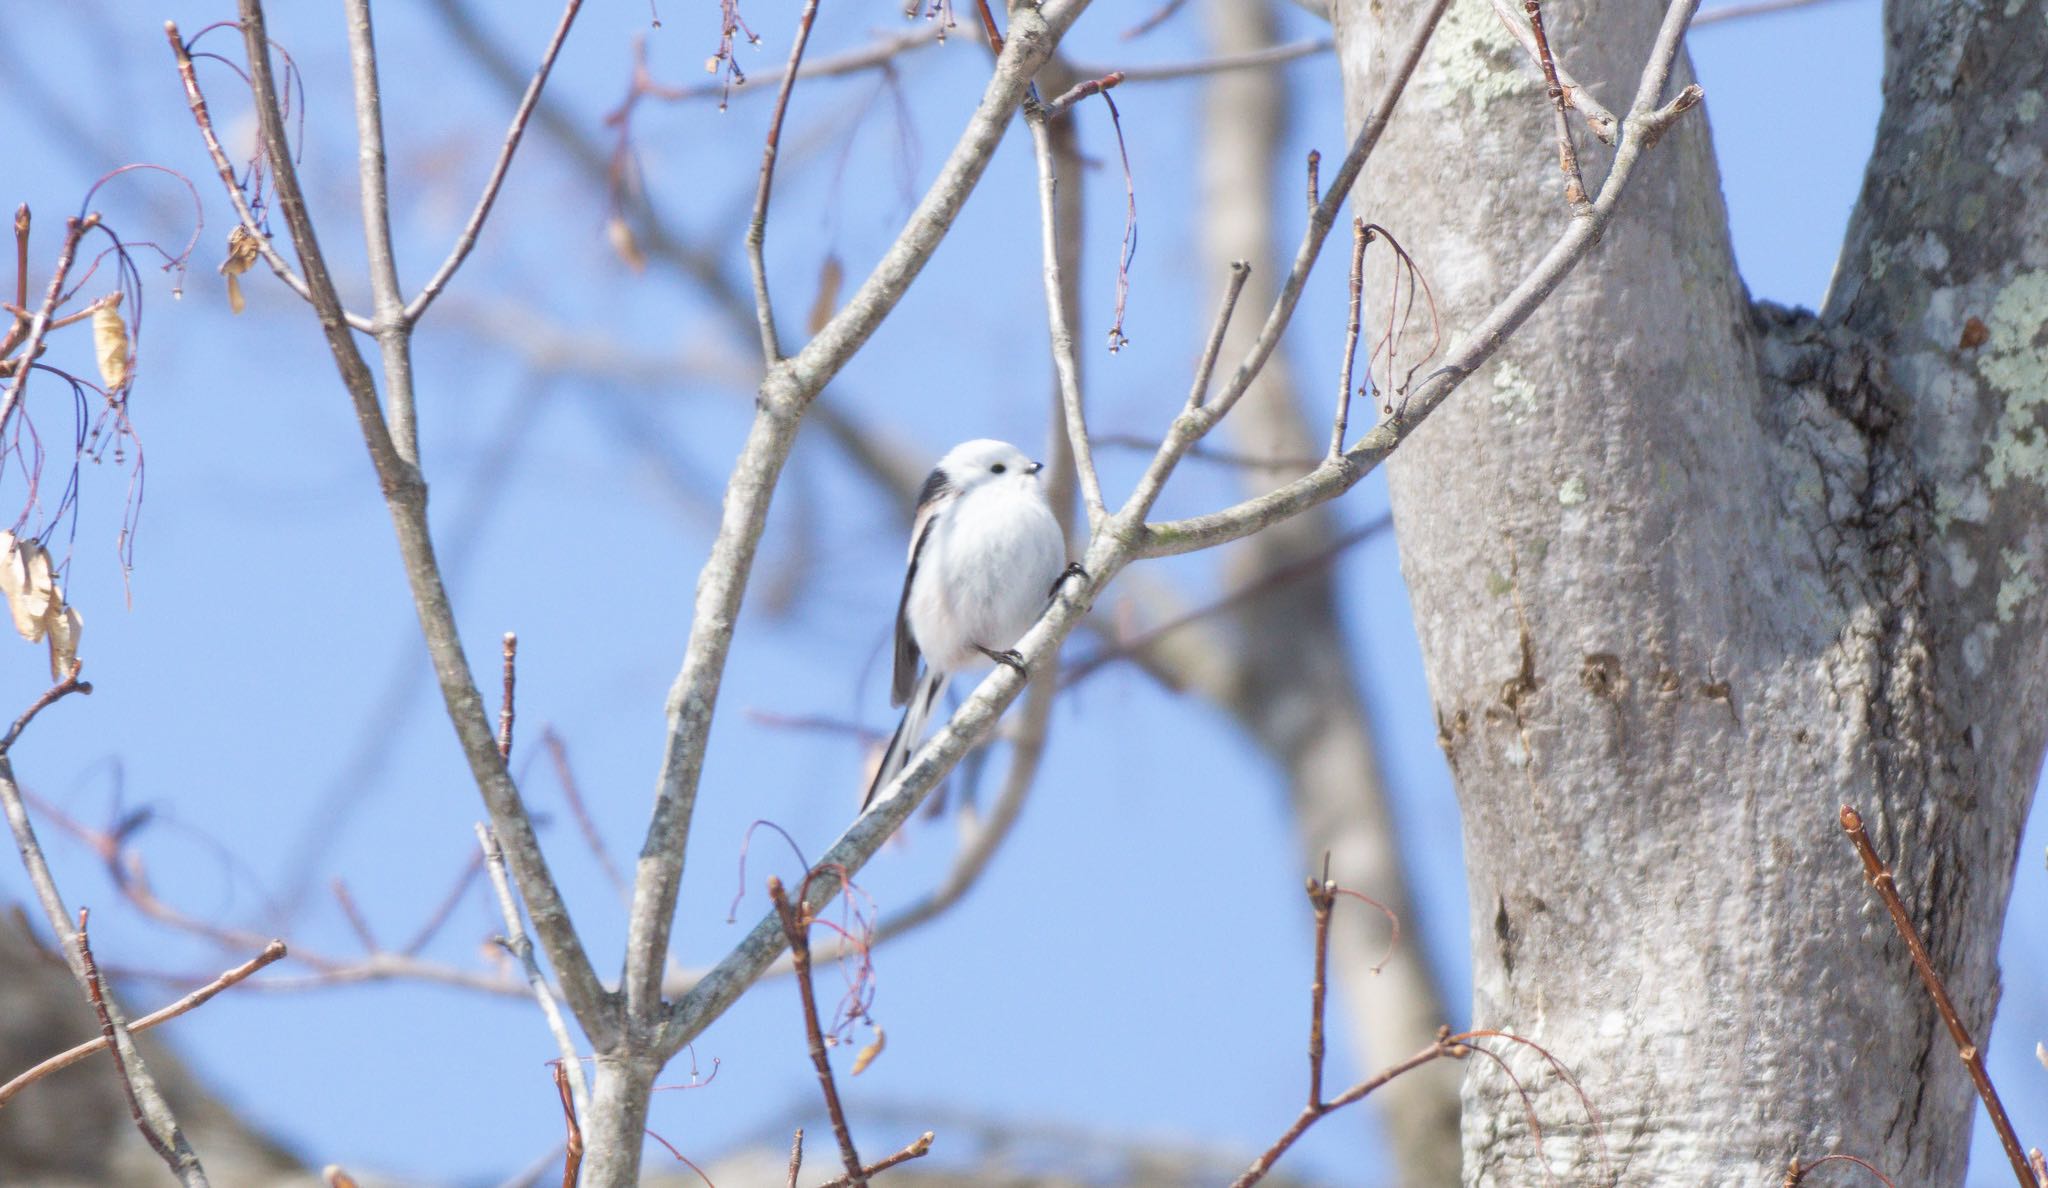 Photo of Long-tailed tit(japonicus) at 野幌森林公園 by マルCU